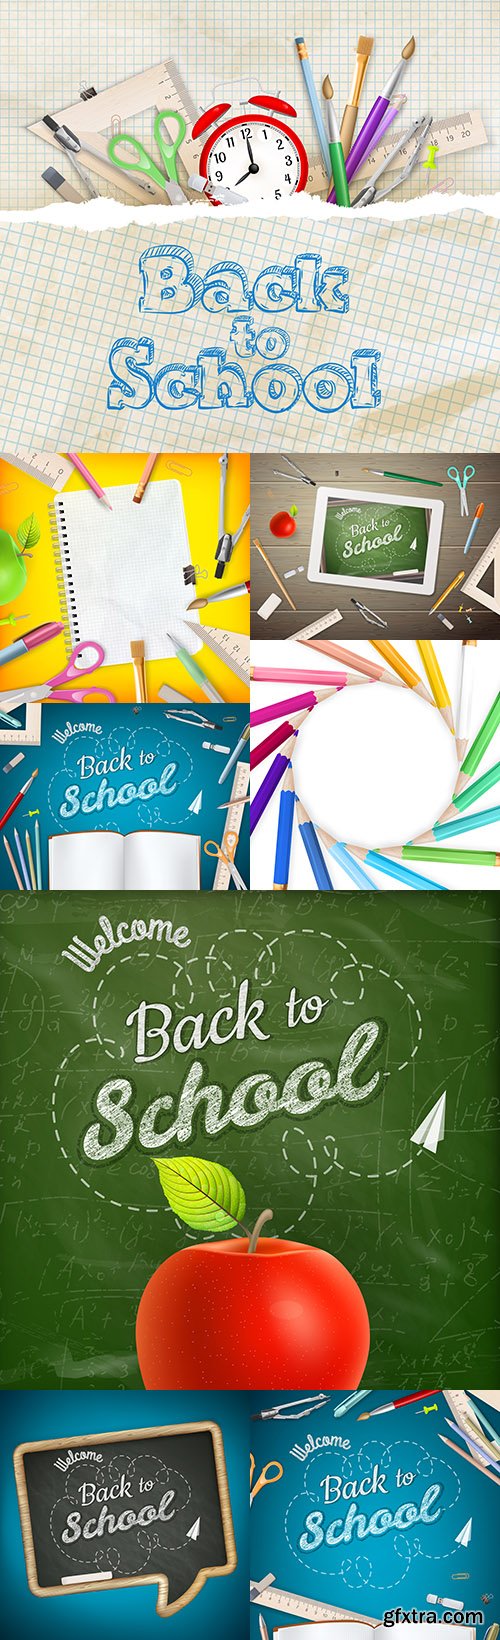 Back to school and accessories collection illustration 40
